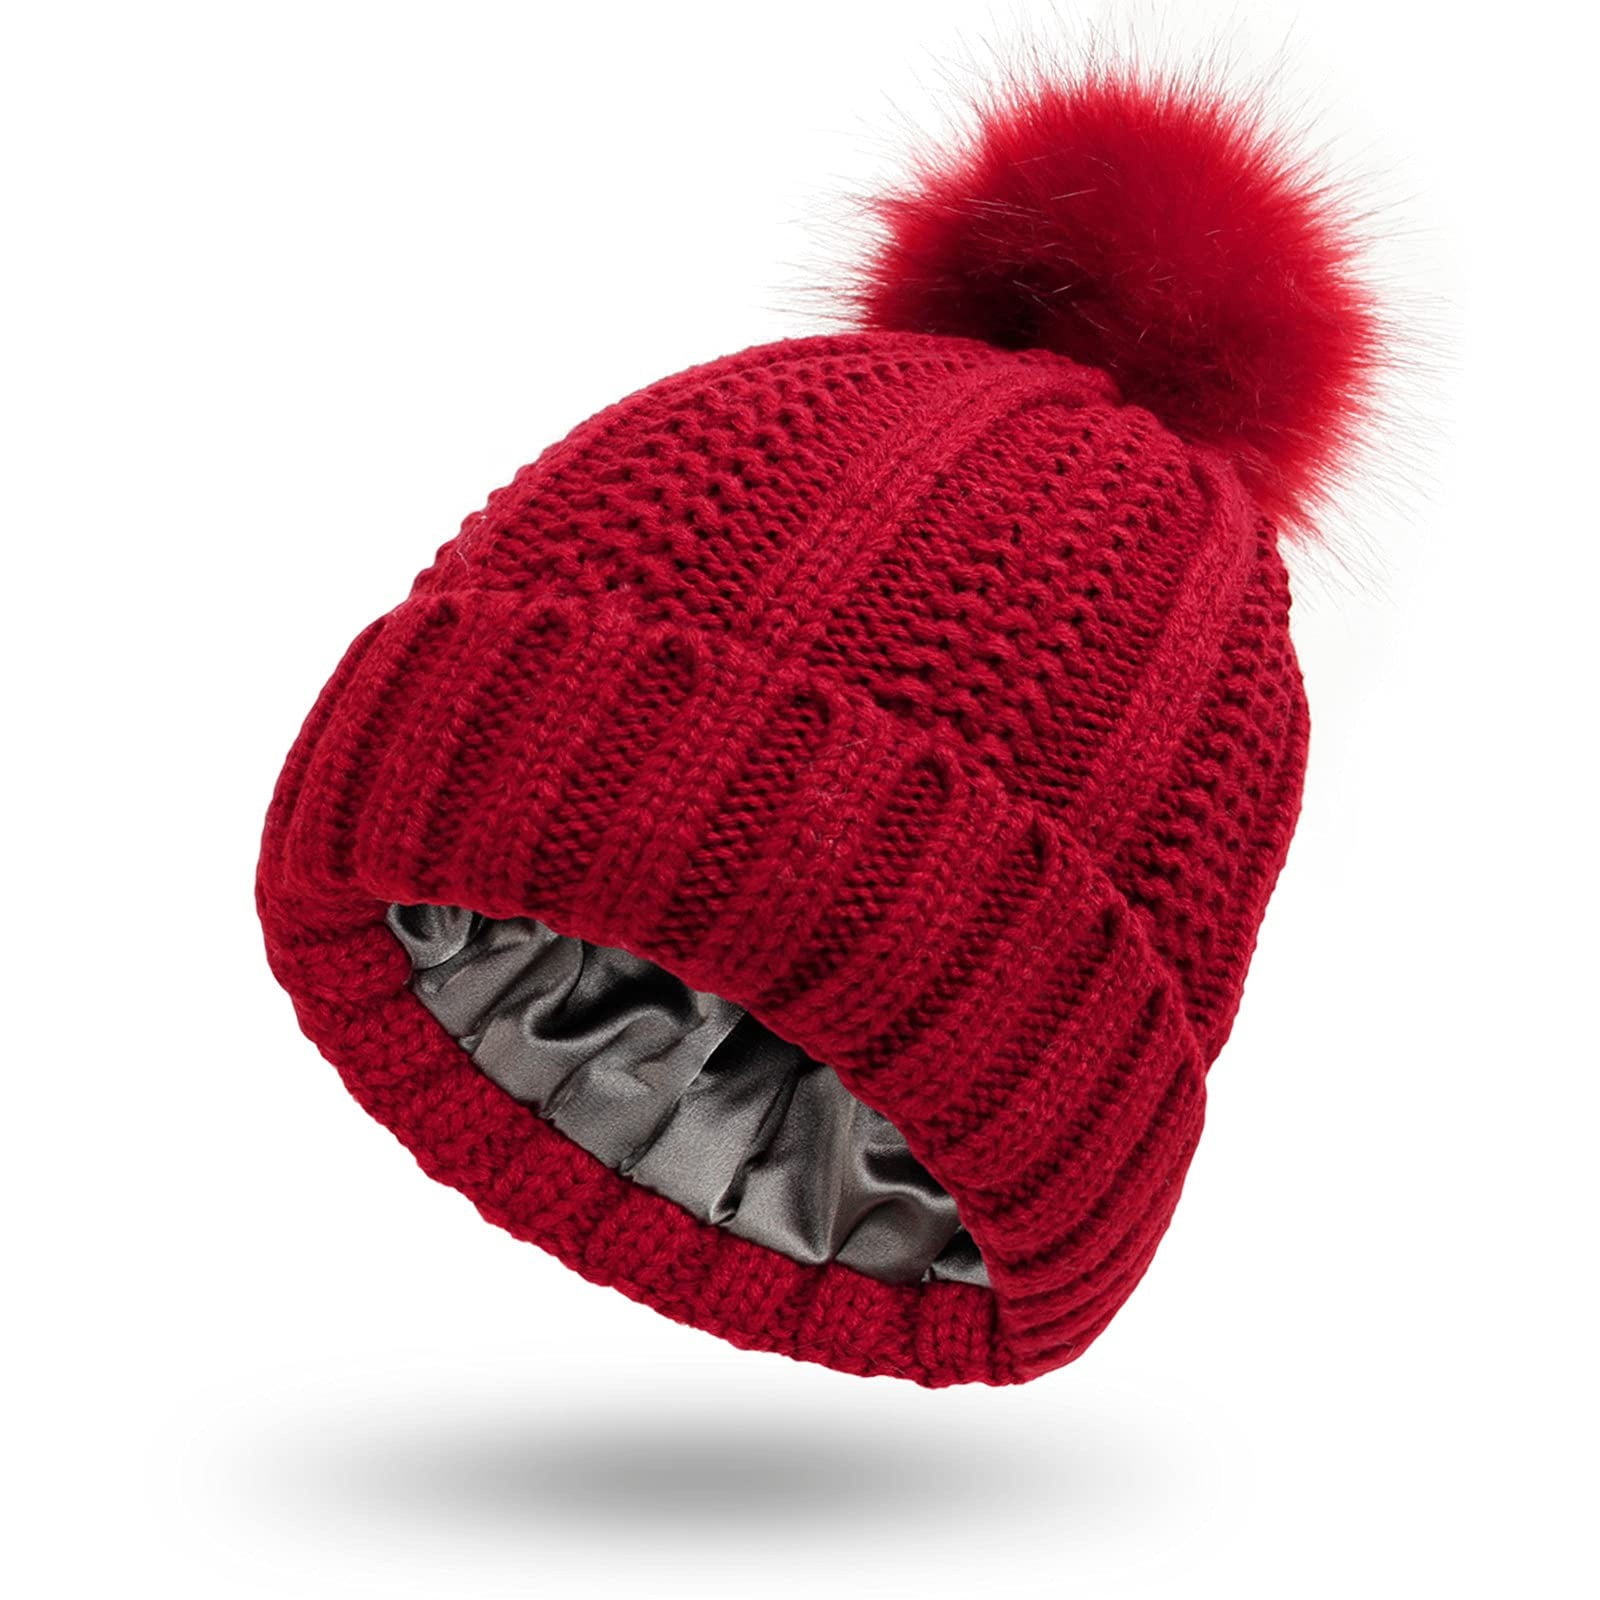 KDDYLITQ Beanie Pom Poms Balls Christmas Hats for Women Cable Knit